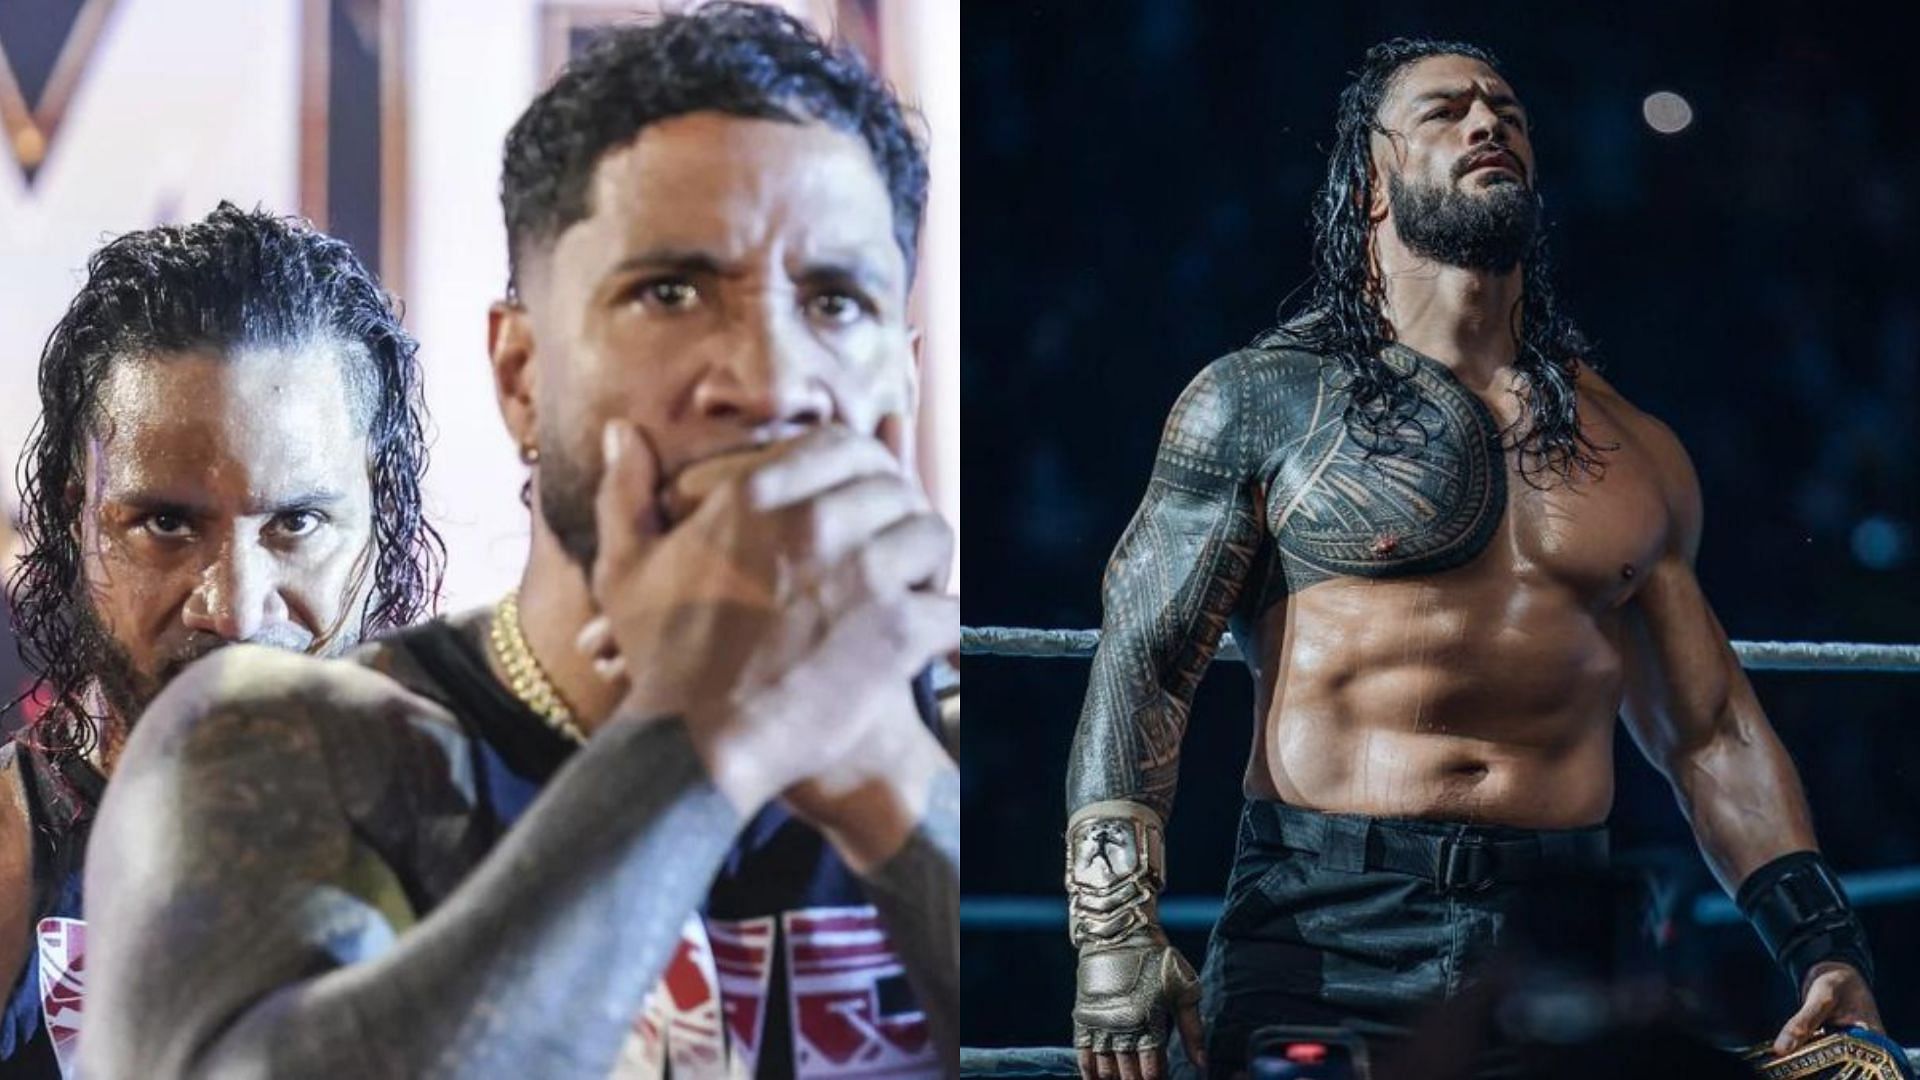 Roman Reigns is expected to address Jimmy Uso